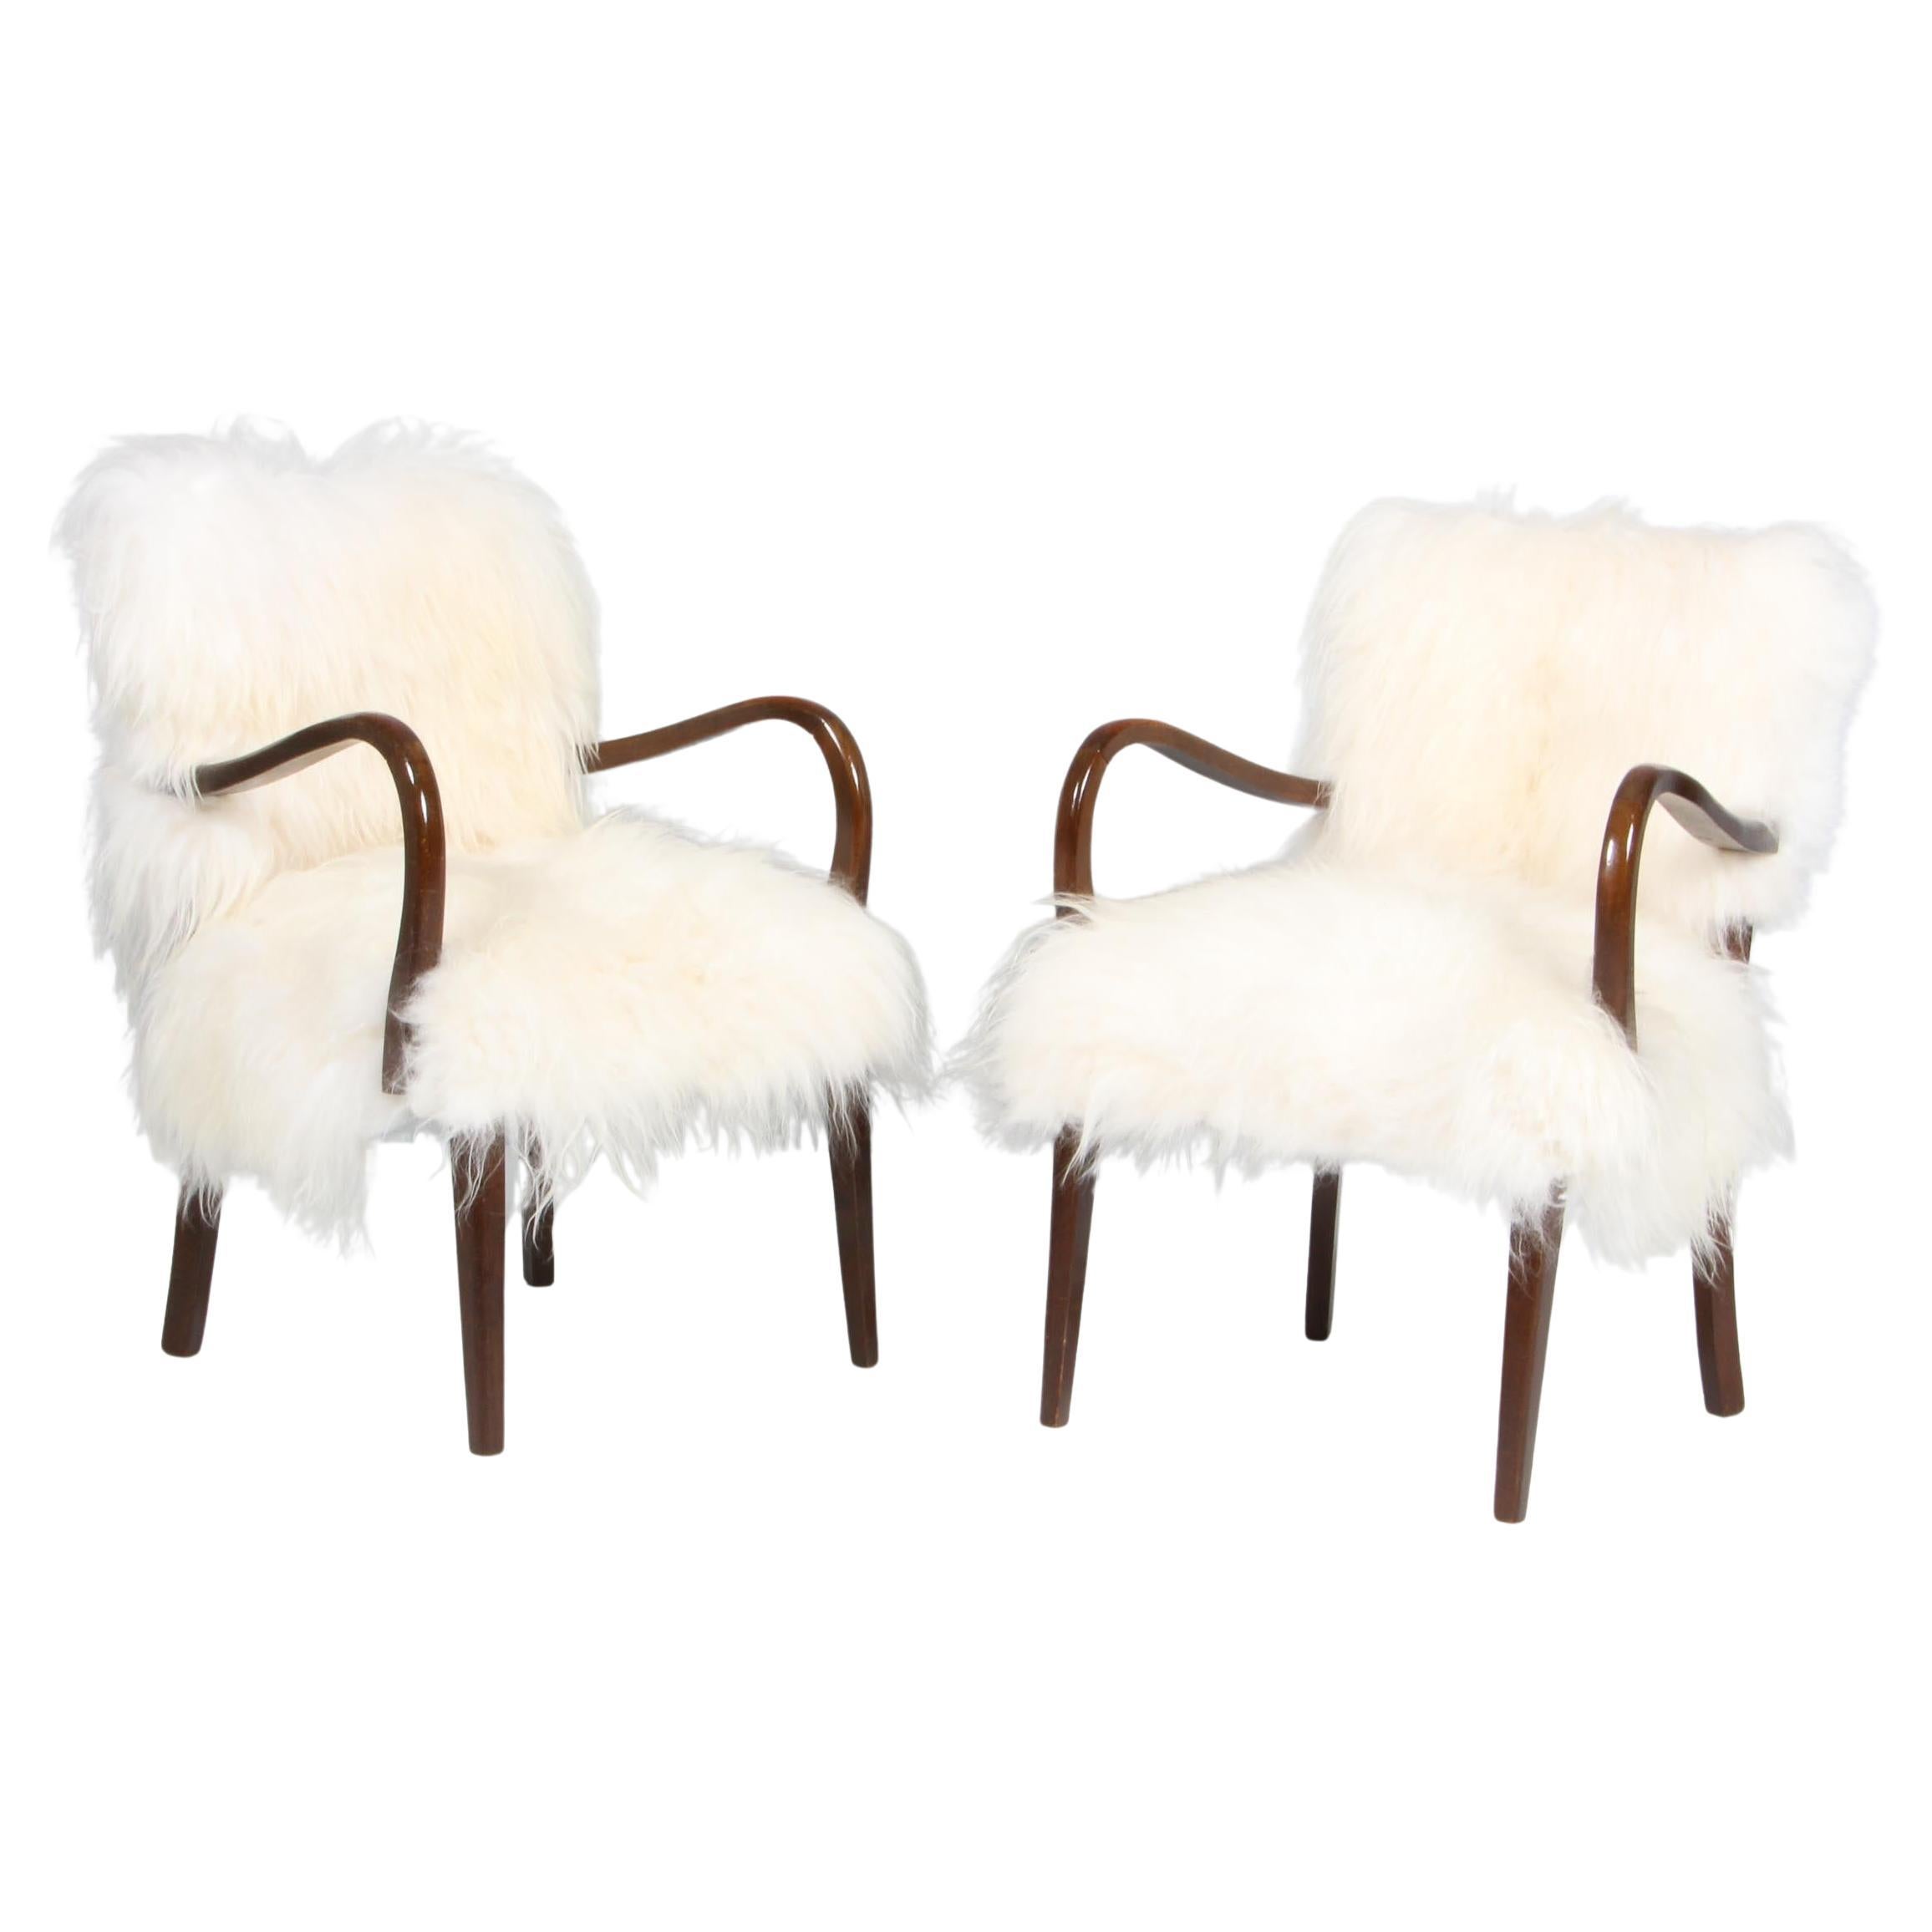 Pair of 1940s Chairs in longhaired lambskin, Denmark For Sale